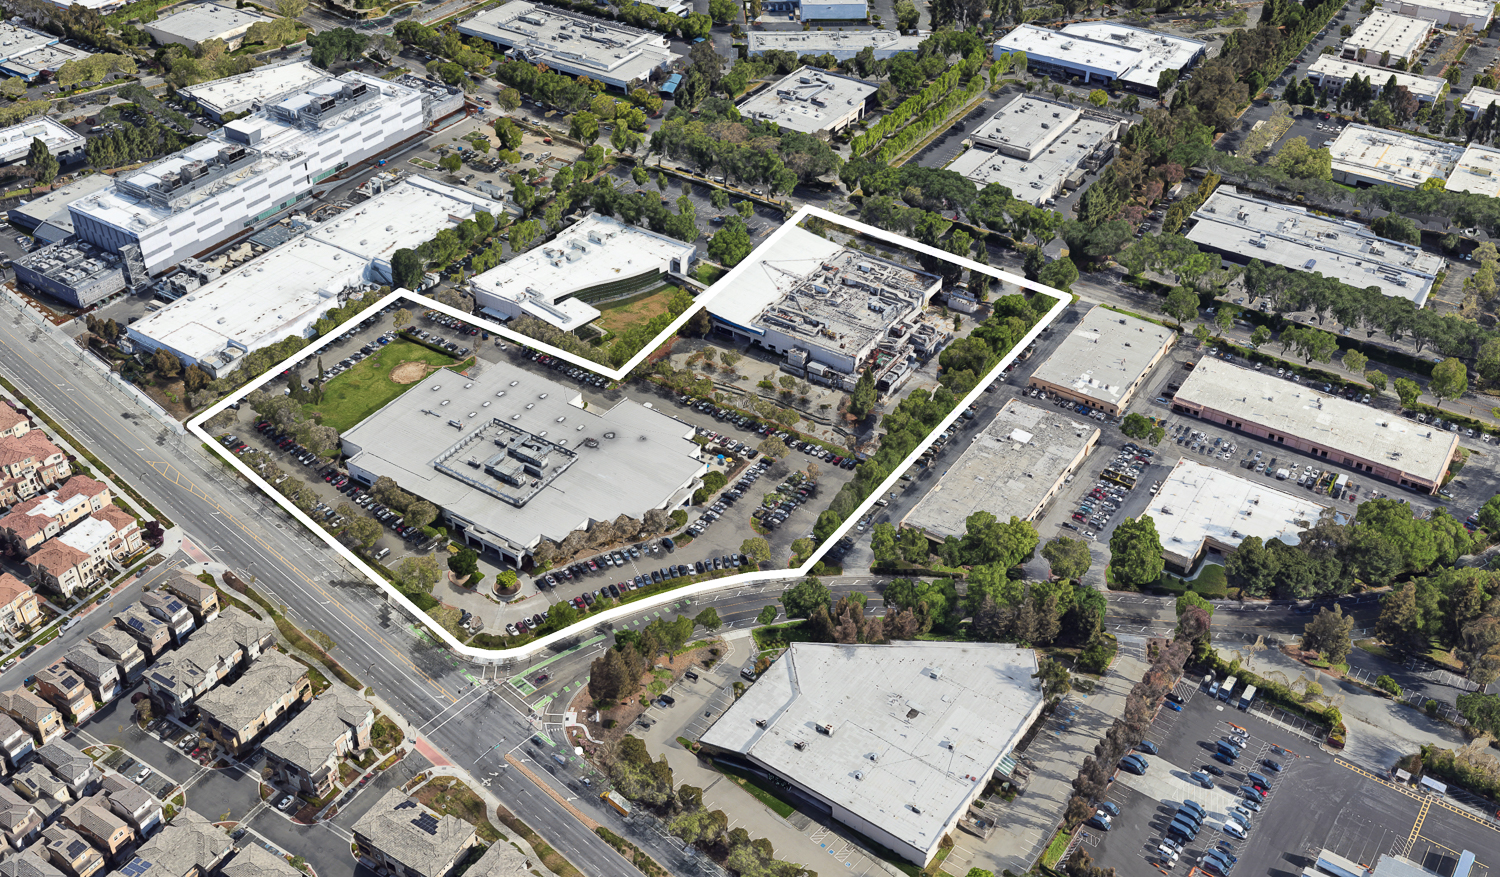 Stack Infrastructure Data Center Campus existing condition approximately outlined by YIMBY, image via Google Street View